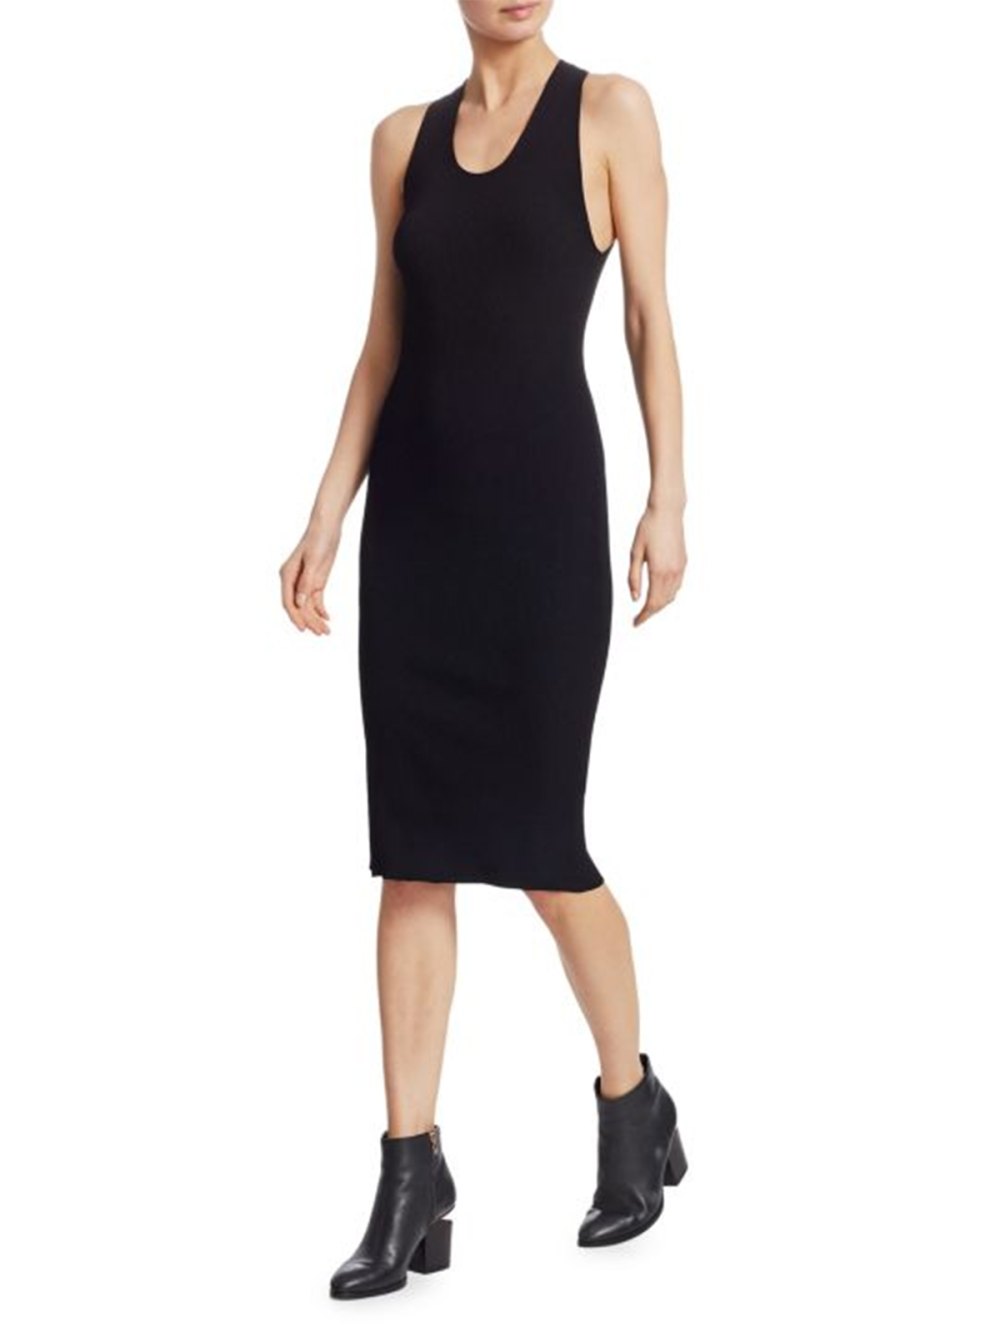 This Designer Dress Is Under $100 on Sale at Saks Off 5th | Us Weekly